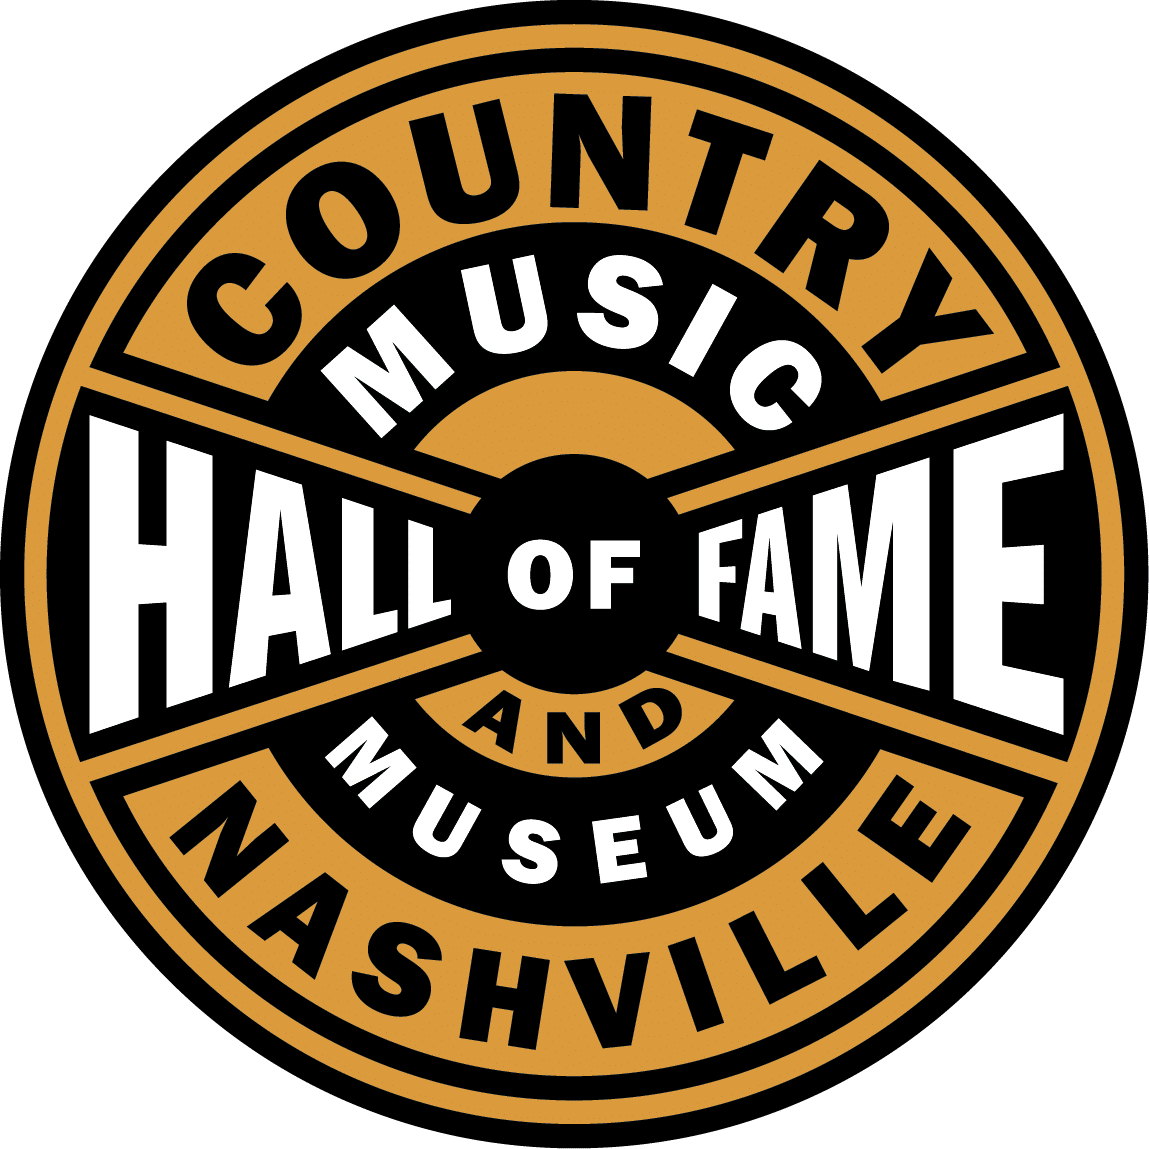 Country Music Hall of Fame logo